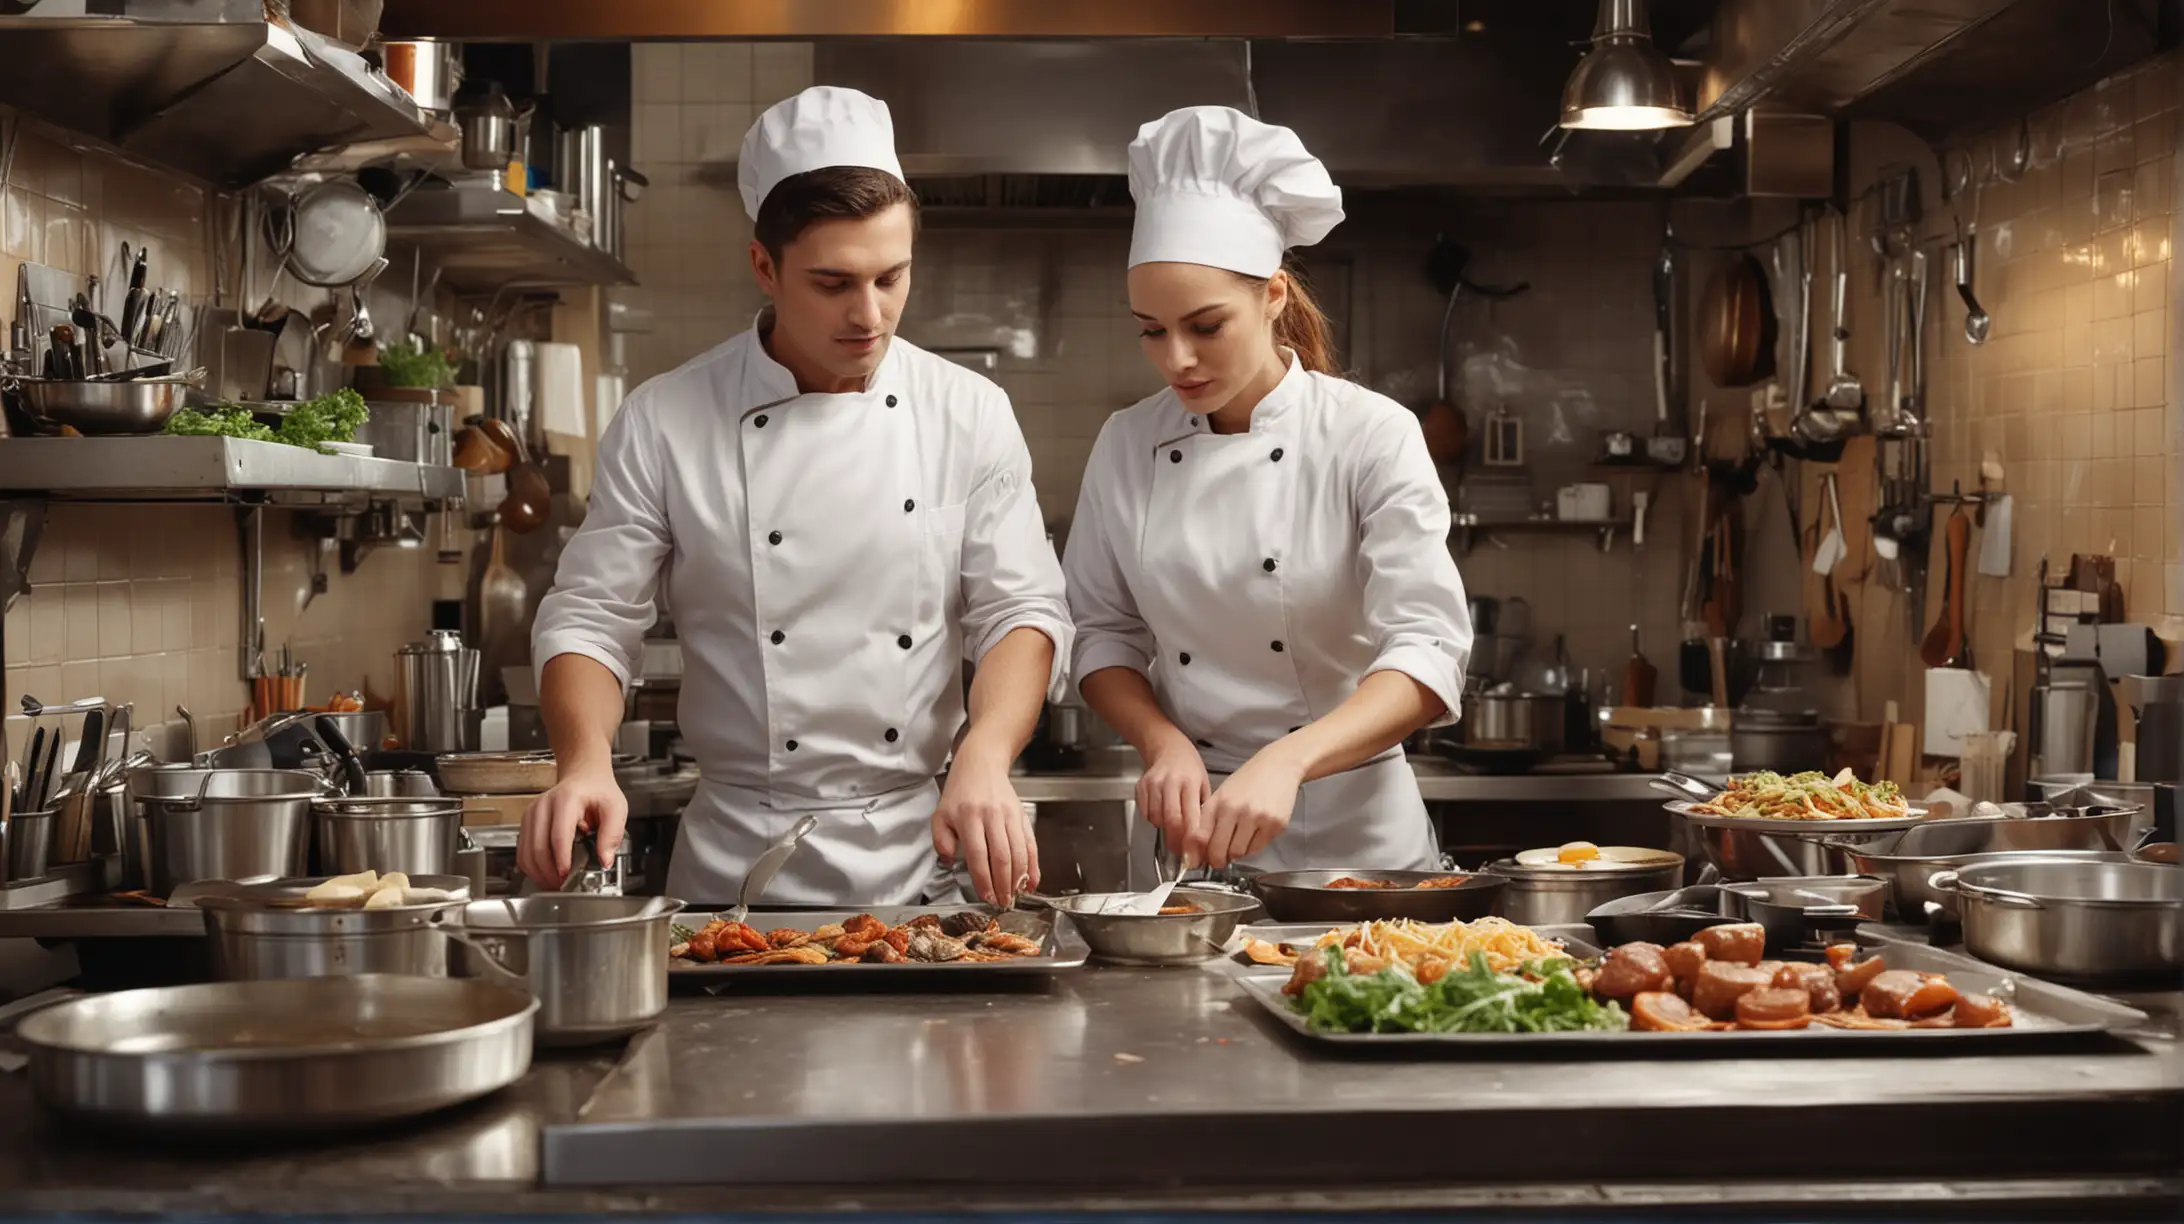 Professional Chefs Cooking in a Vibrant Restaurant Kitchen